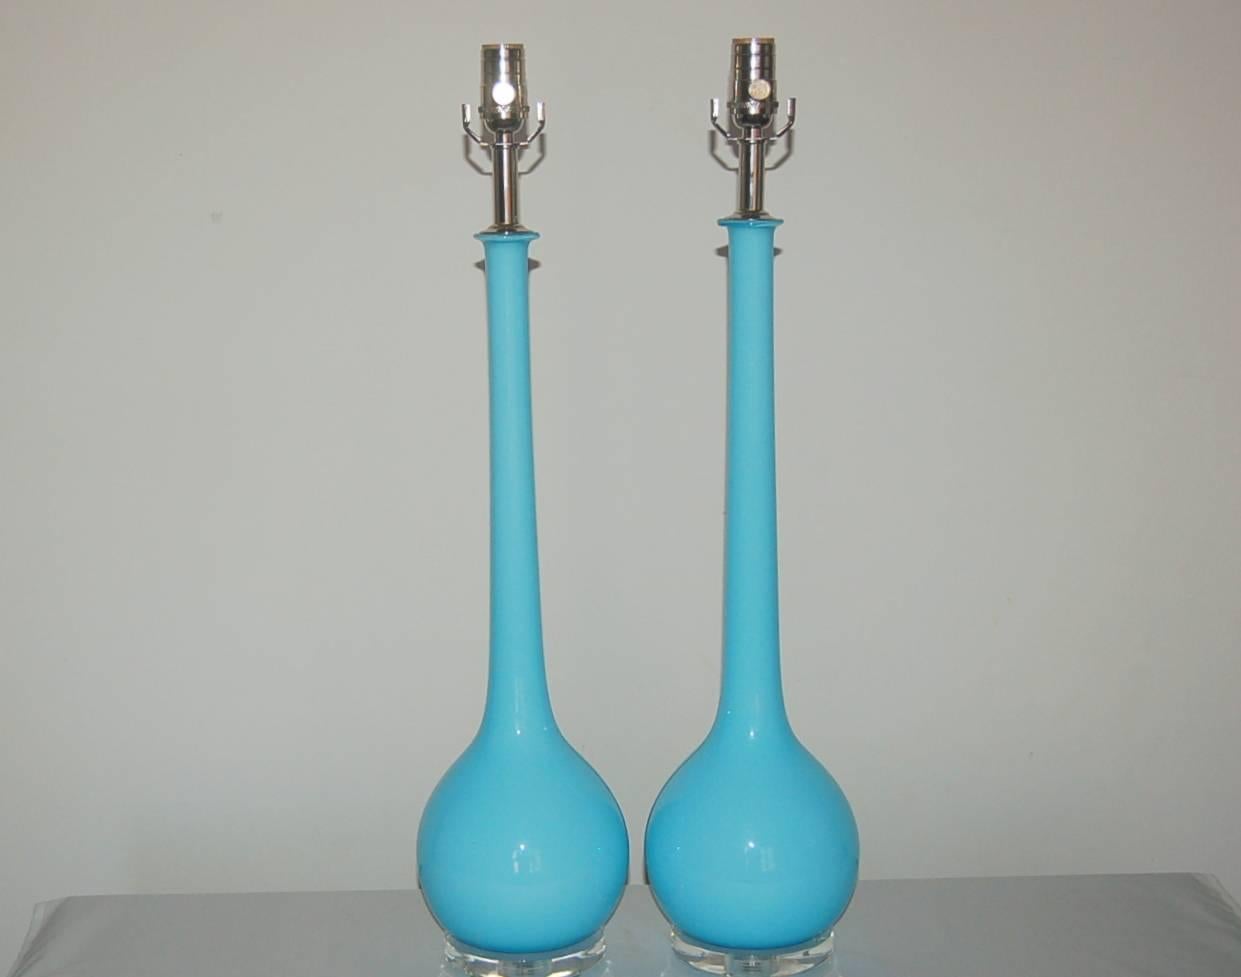 Vintage pair of sleek Murano long neck table lamps in SKY BLUE by Archimede Seguso. Our best sellers due to their sleek, sexy lines. Available in various colors - call for more info. 

The lamps measure 28 inches from tabletop to socket top. As